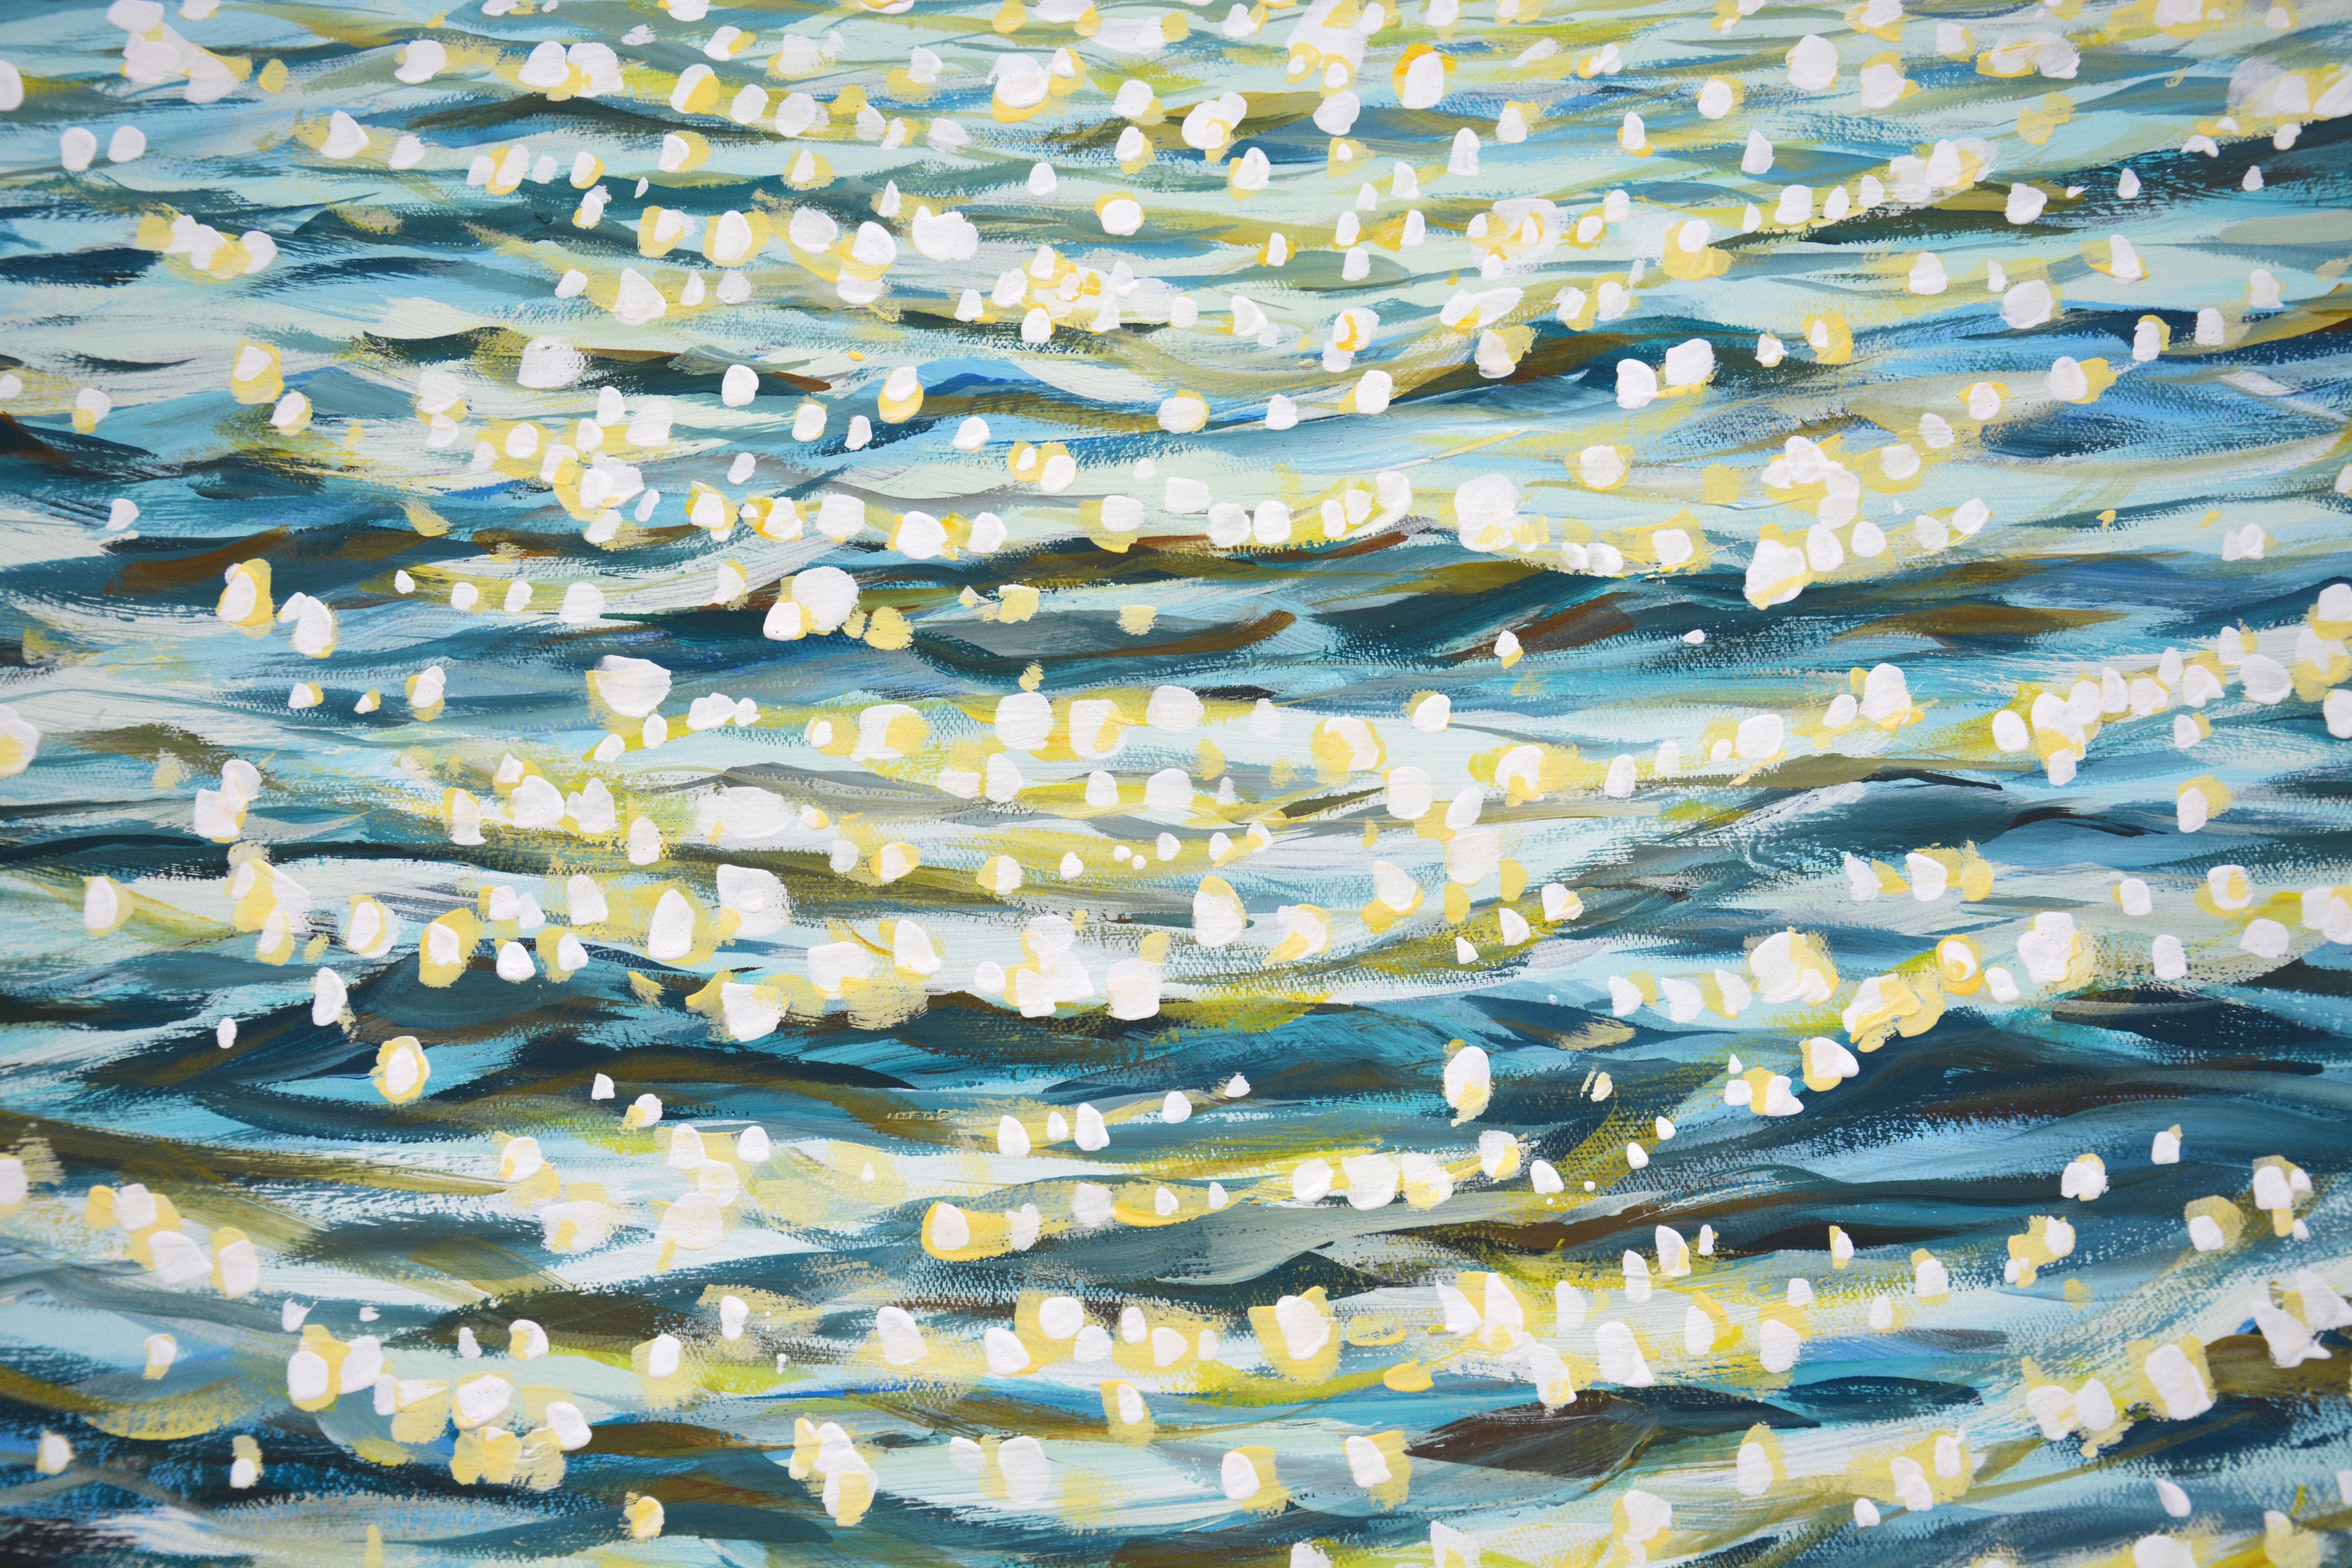 Light on the water 2. Blue water, waves, waves, ocean shine, sun glare on the water create an atmosphere of relaxation, romance. Made in the style of realism. Part of a permanent series of seascapes. The picture is of good quality, the colors make